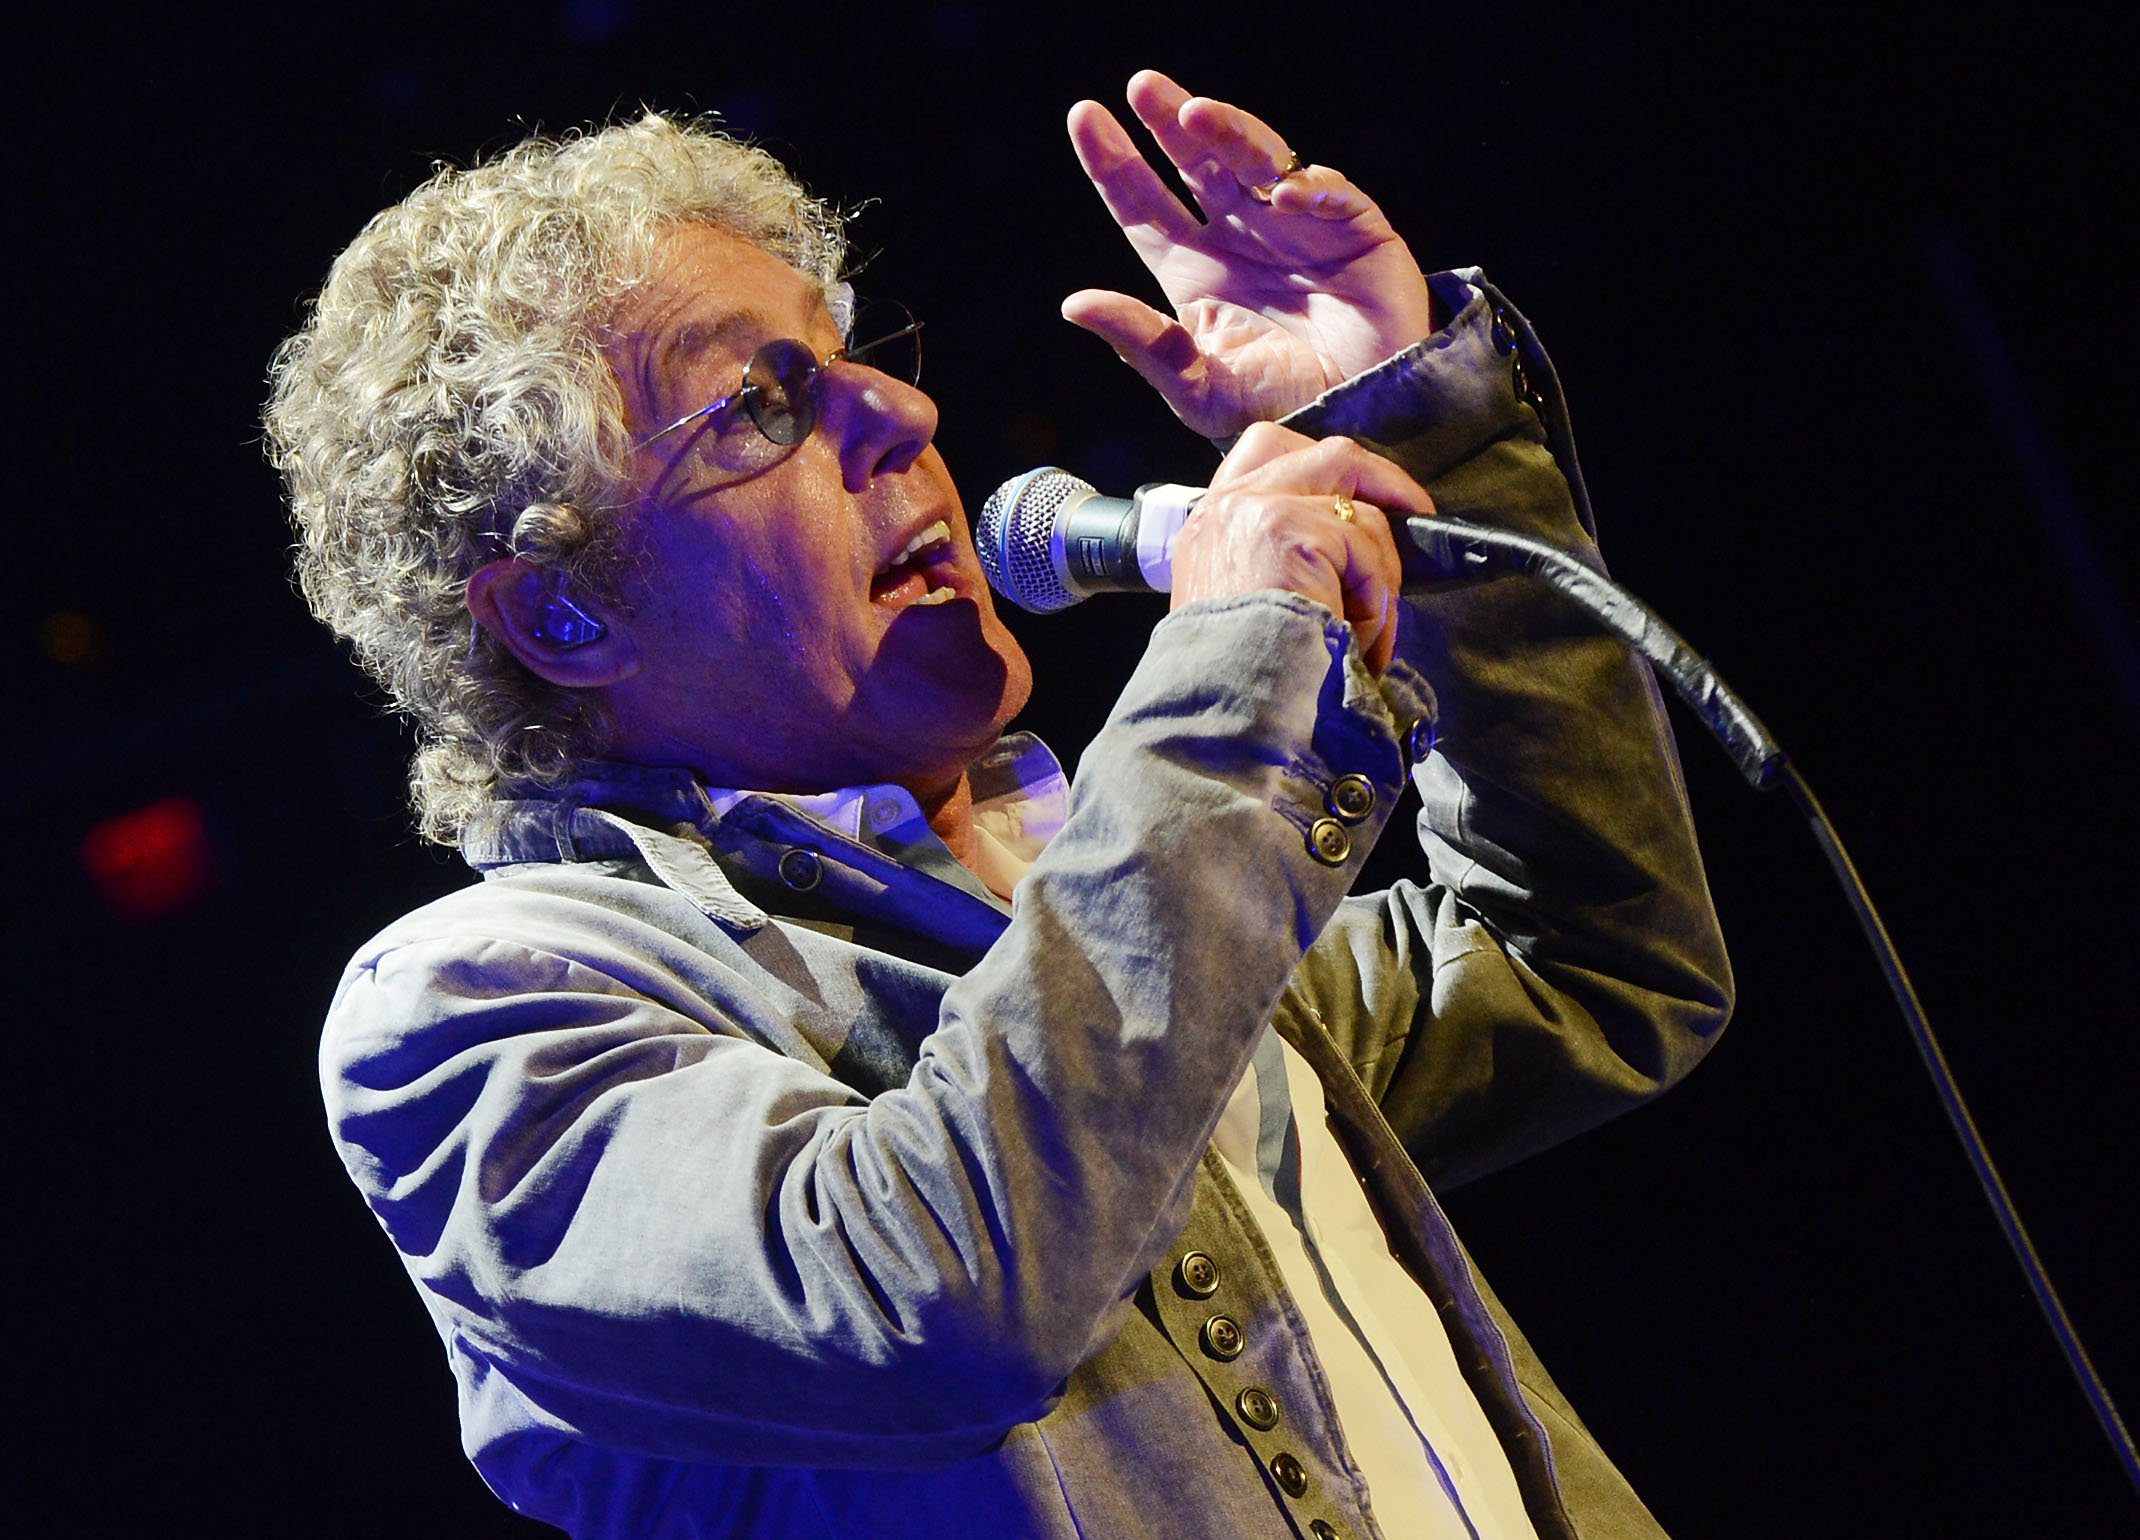 Roger Daltrey performing during The Who's Quadrophenia And More world tour in Sunrise, Florida, in November 2012. Photos by Rick Diamond/Getty Images for The Who